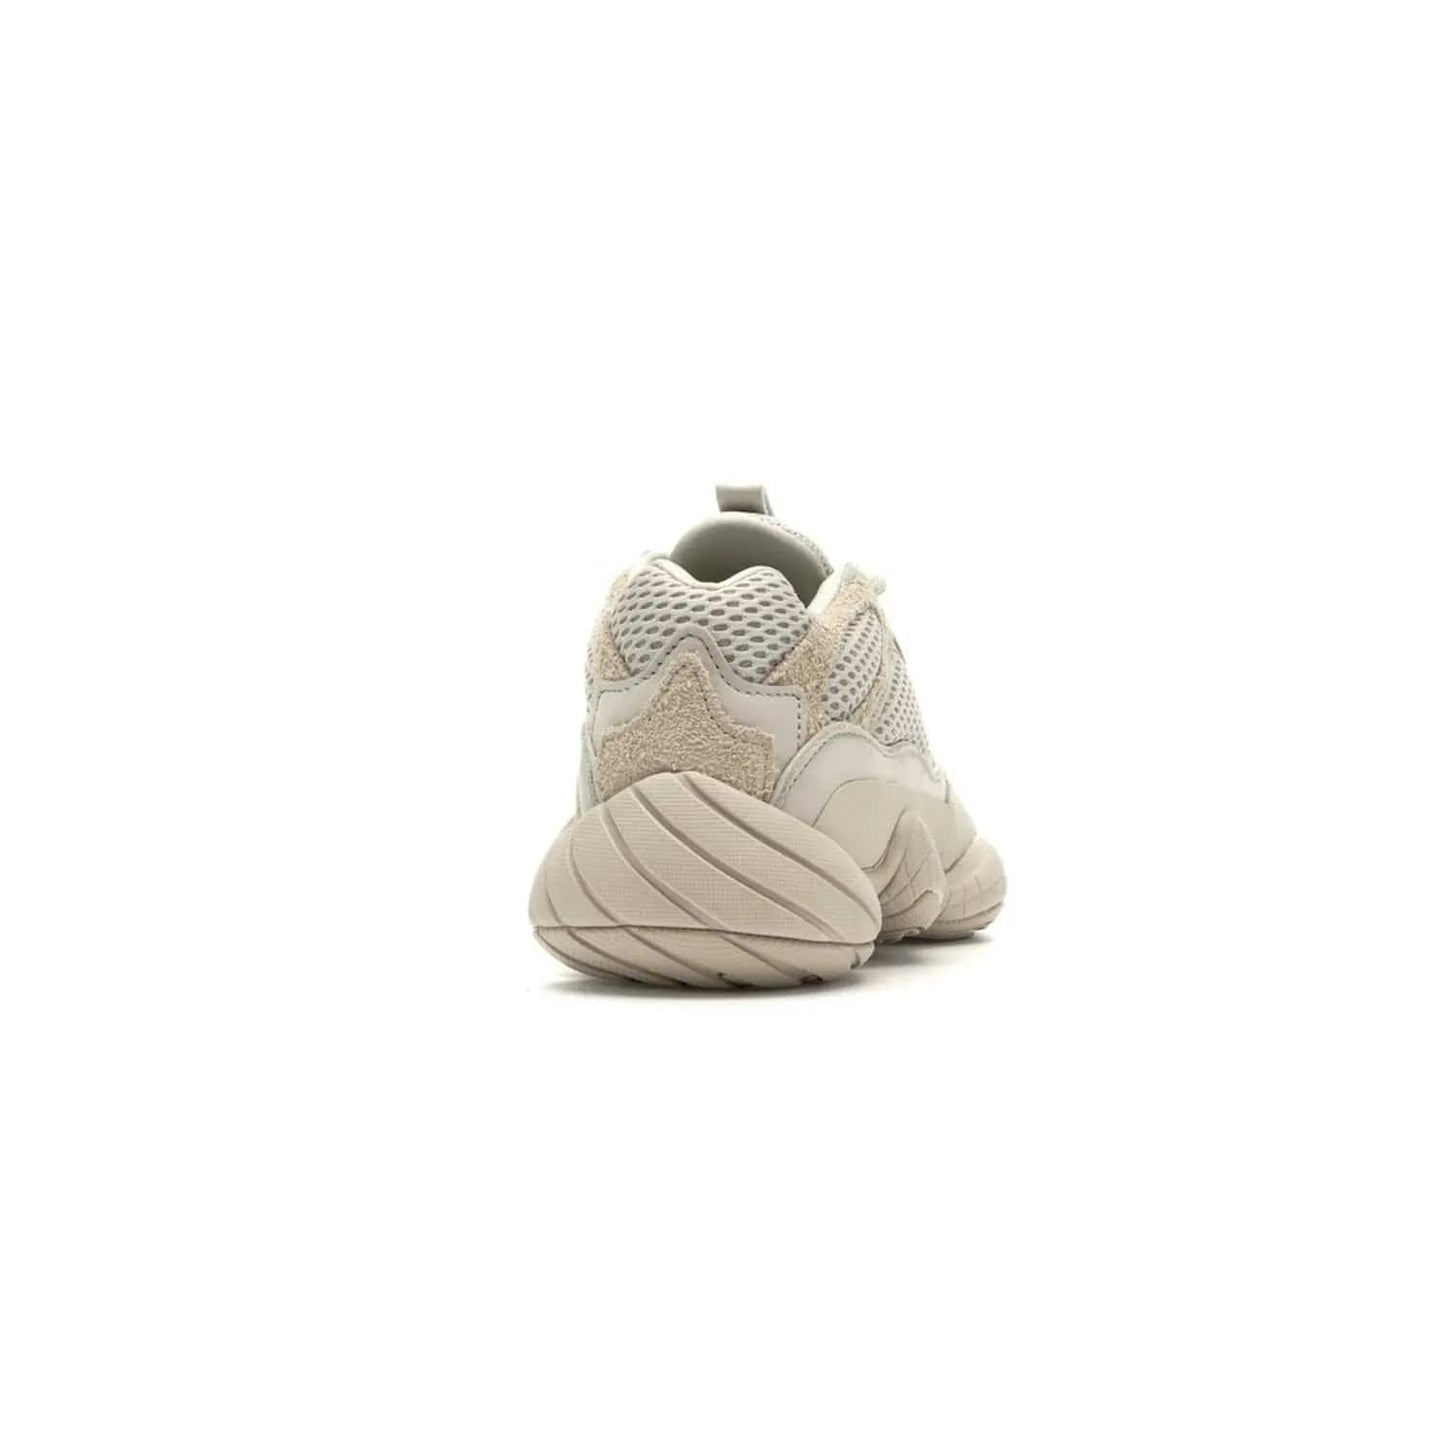 adidas Yeezy 500 Blush - Image 29 - Only at www.BallersClubKickz.com - Step up your sneaker game with the Adidas Yeezy 500 Blush. Monochromatic pale pink palette, hiking-inspired suede/mesh construction, plus adiPRENE sole for comfort and performance. Get the Adidas Yeezy 500 and experience true style and comfort.